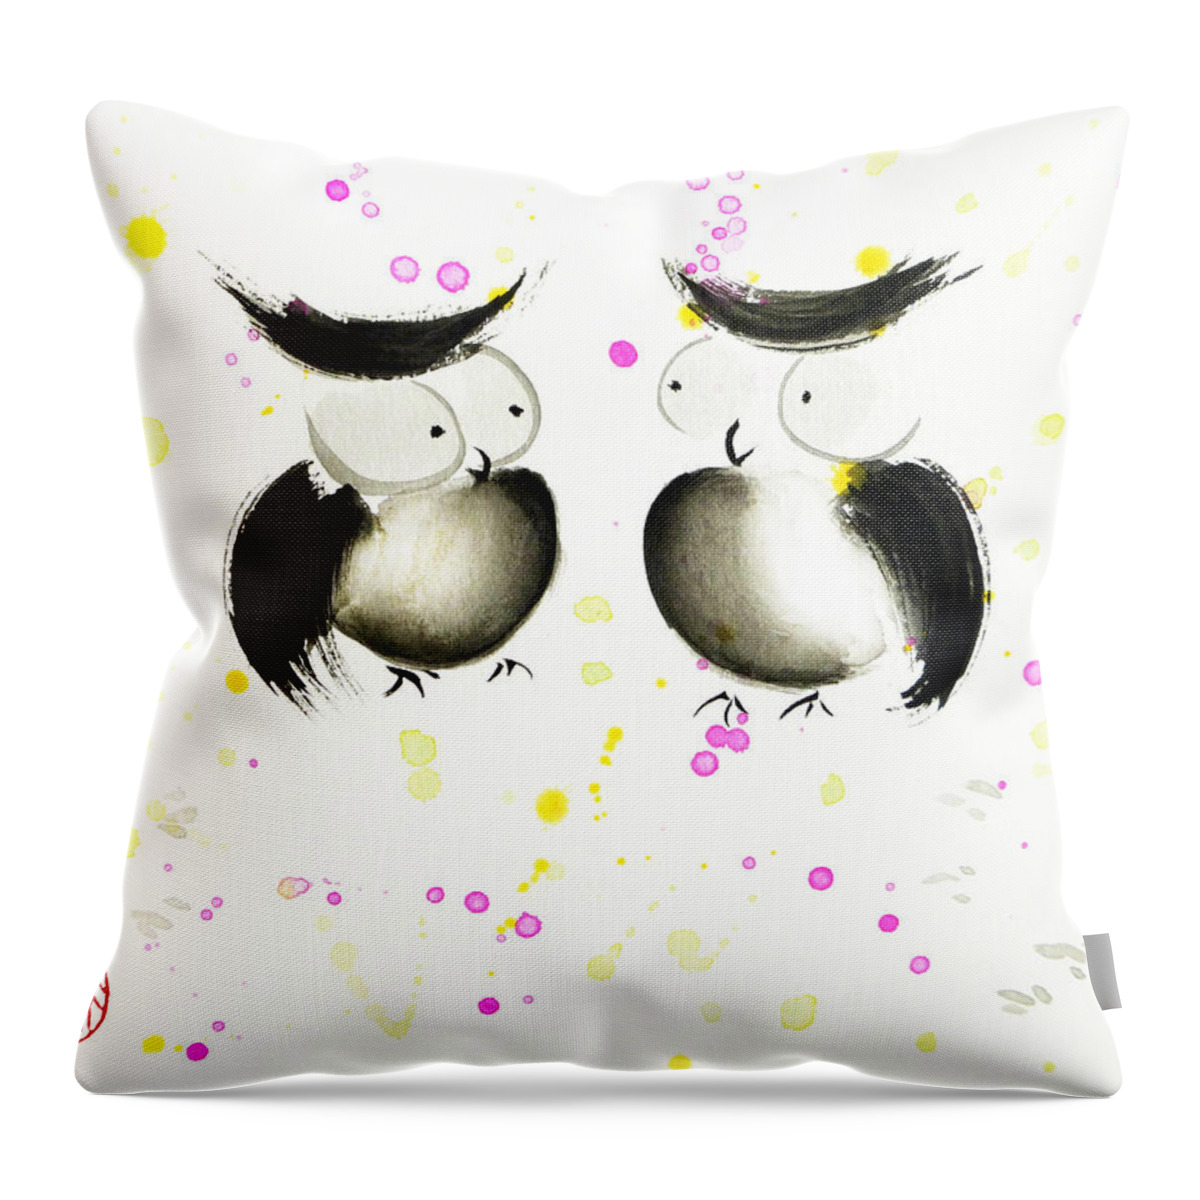 Whimsical Owls Throw Pillow featuring the painting Love At First Sight by Oiyee At Oystudio